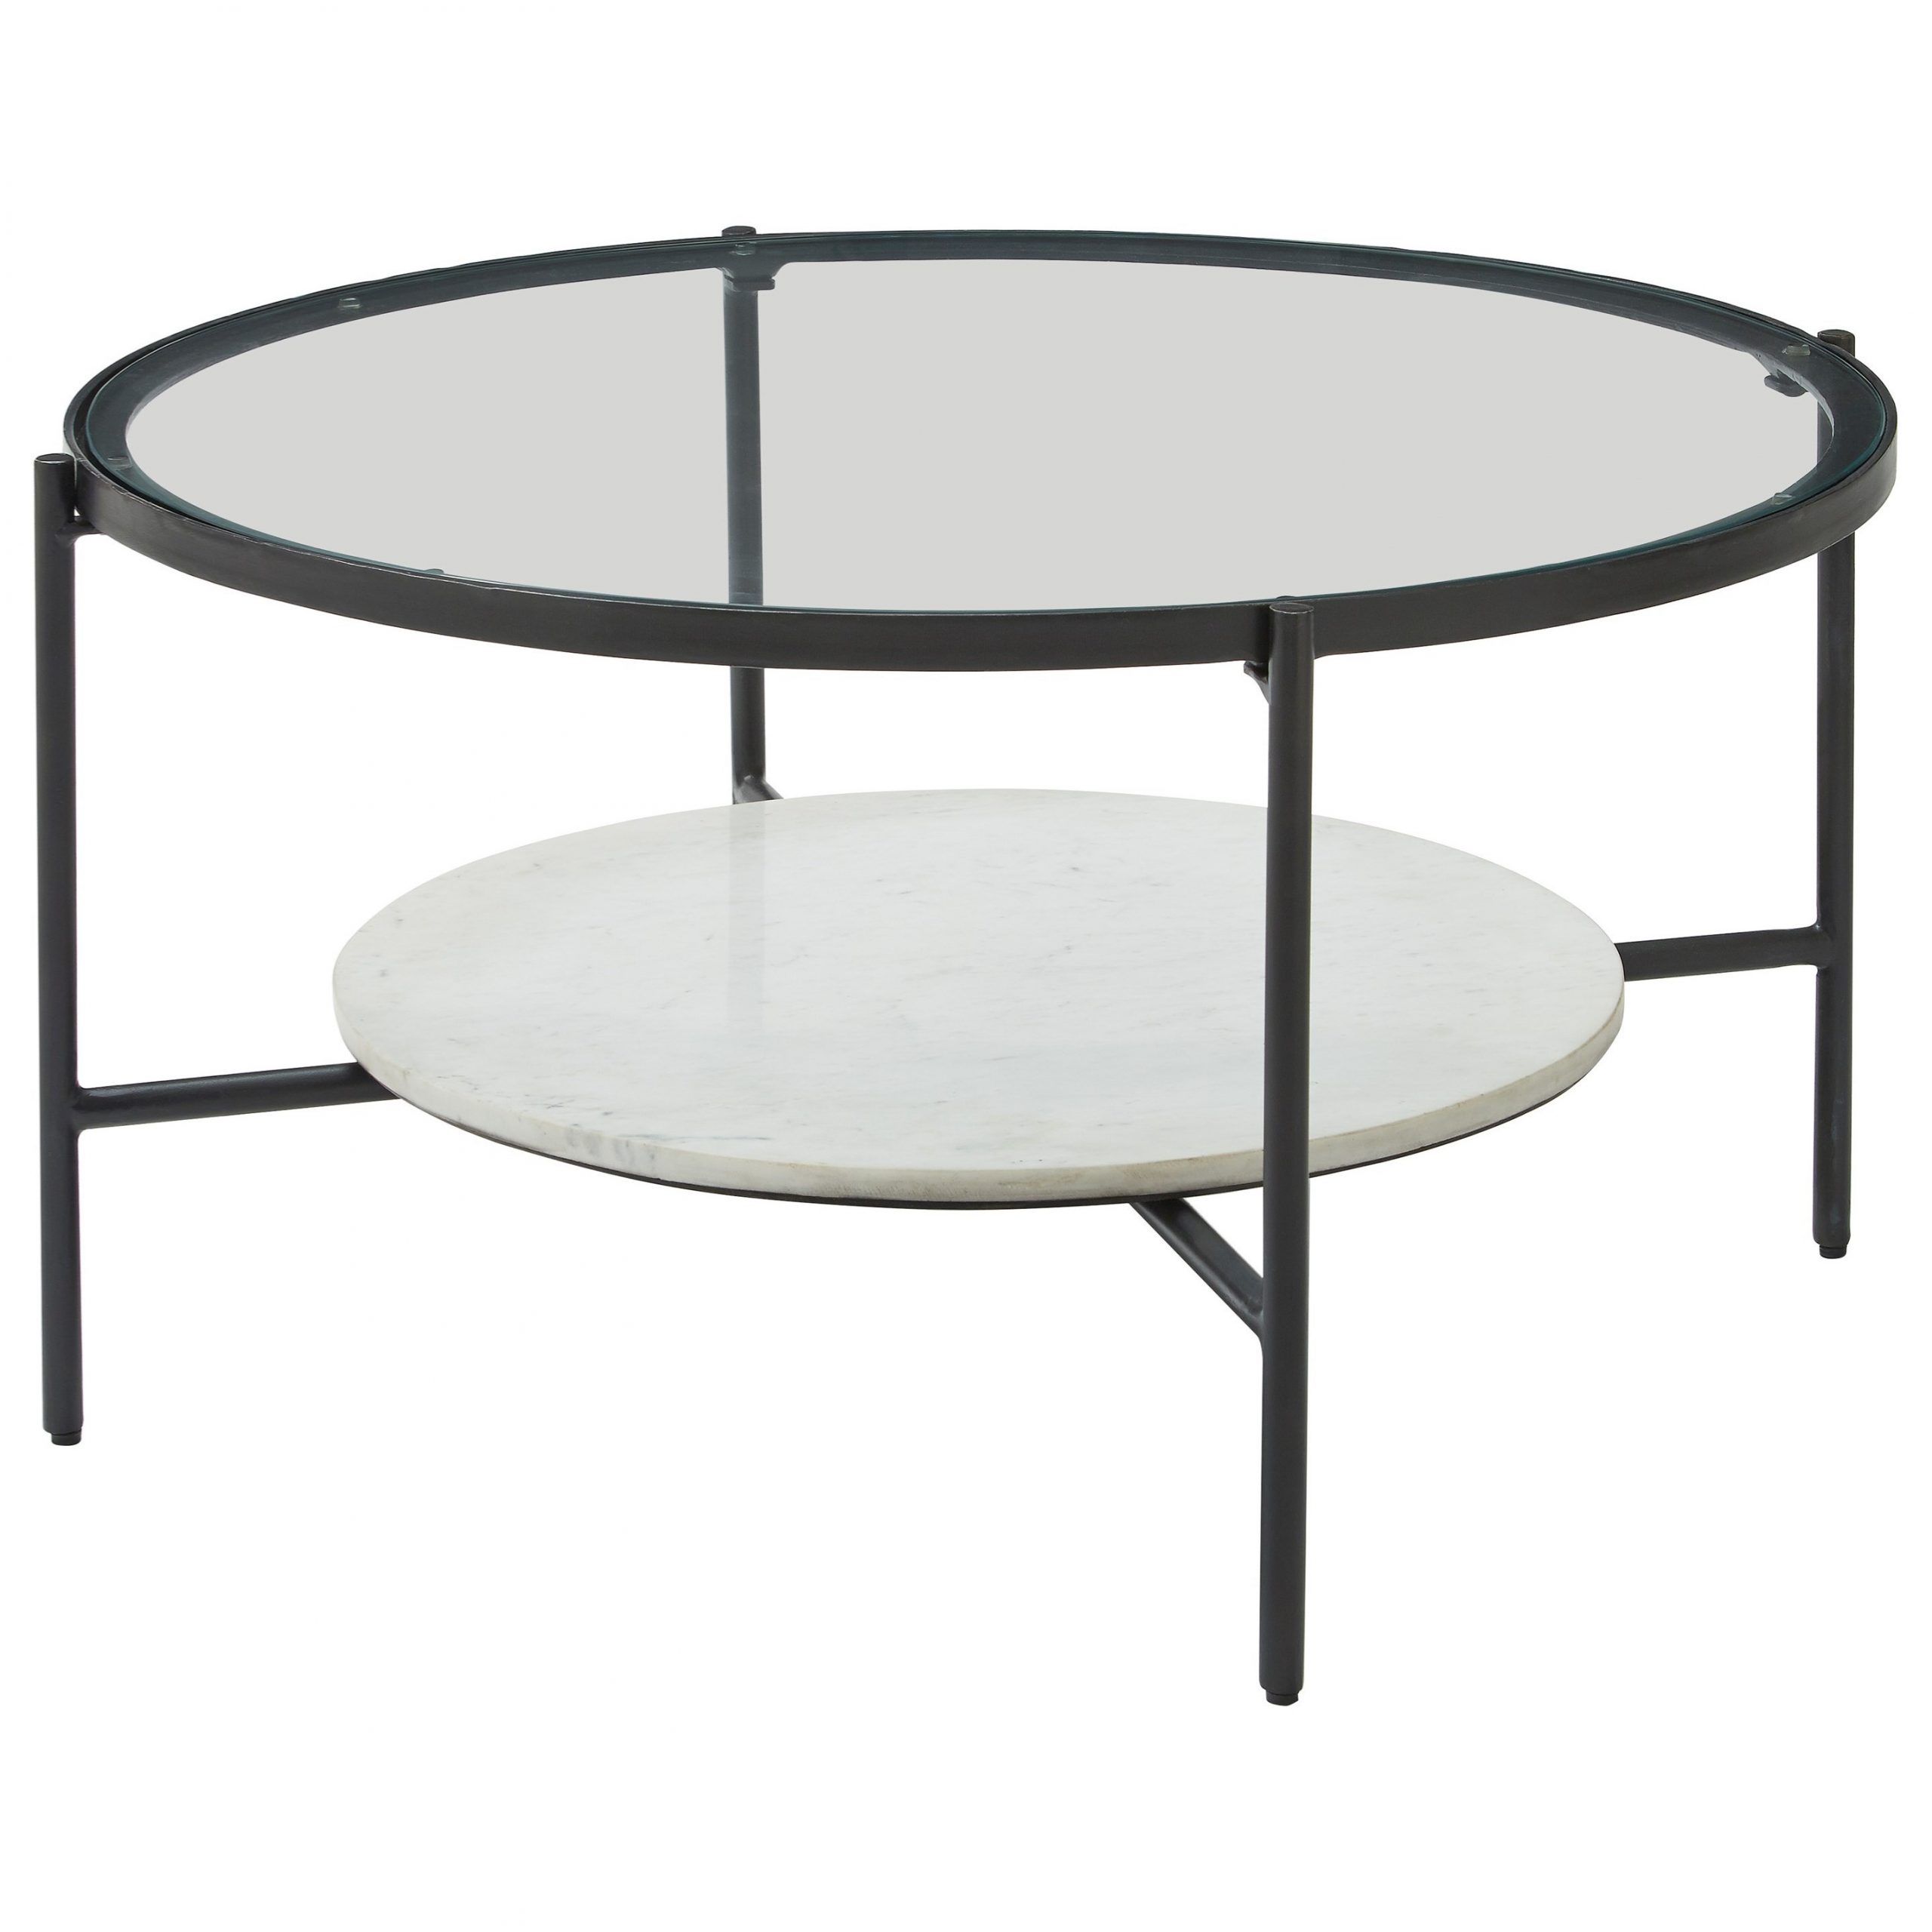 Signature Zia Black Metal Round Cocktail Table With Glass Inside Newest Black Round Glass Top Cocktail Tables (Gallery 4 of 20)